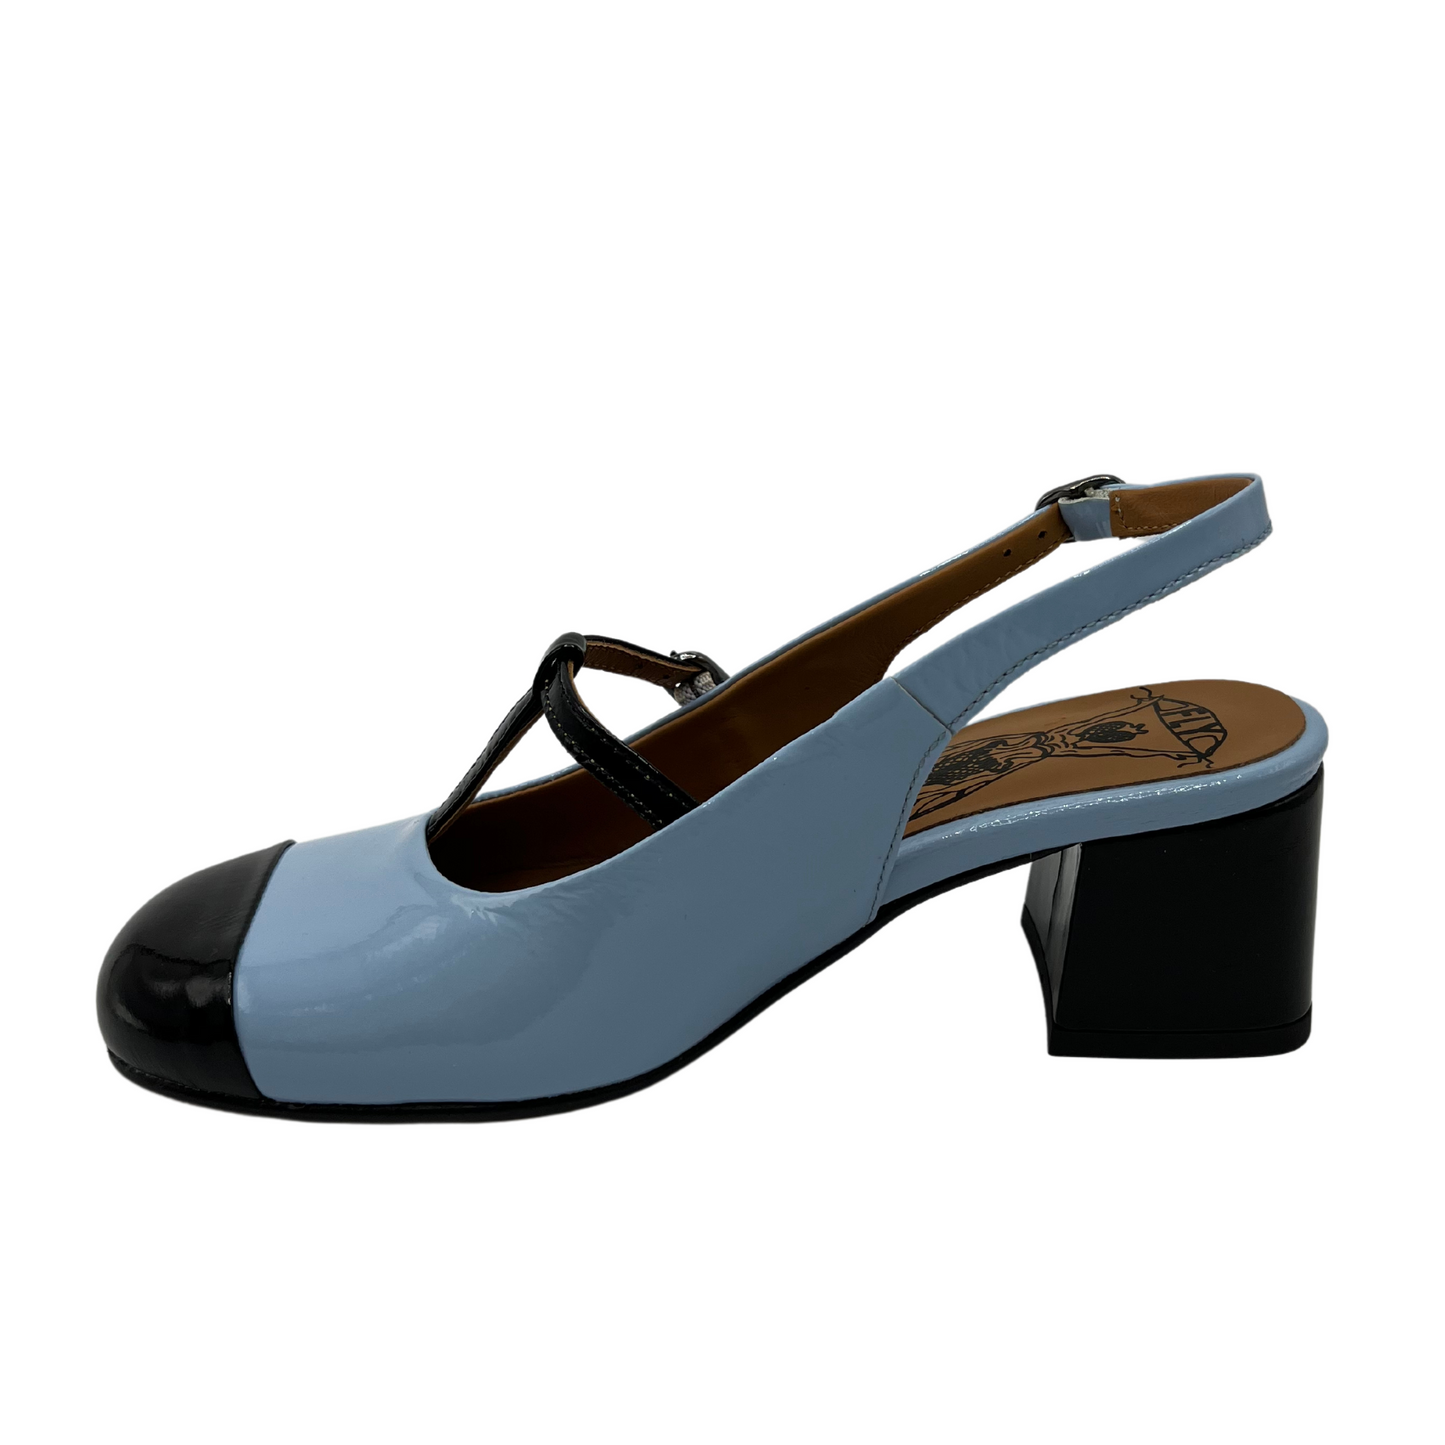 Left facing view of sky blue patent leather sandal with slingback strap and block heel